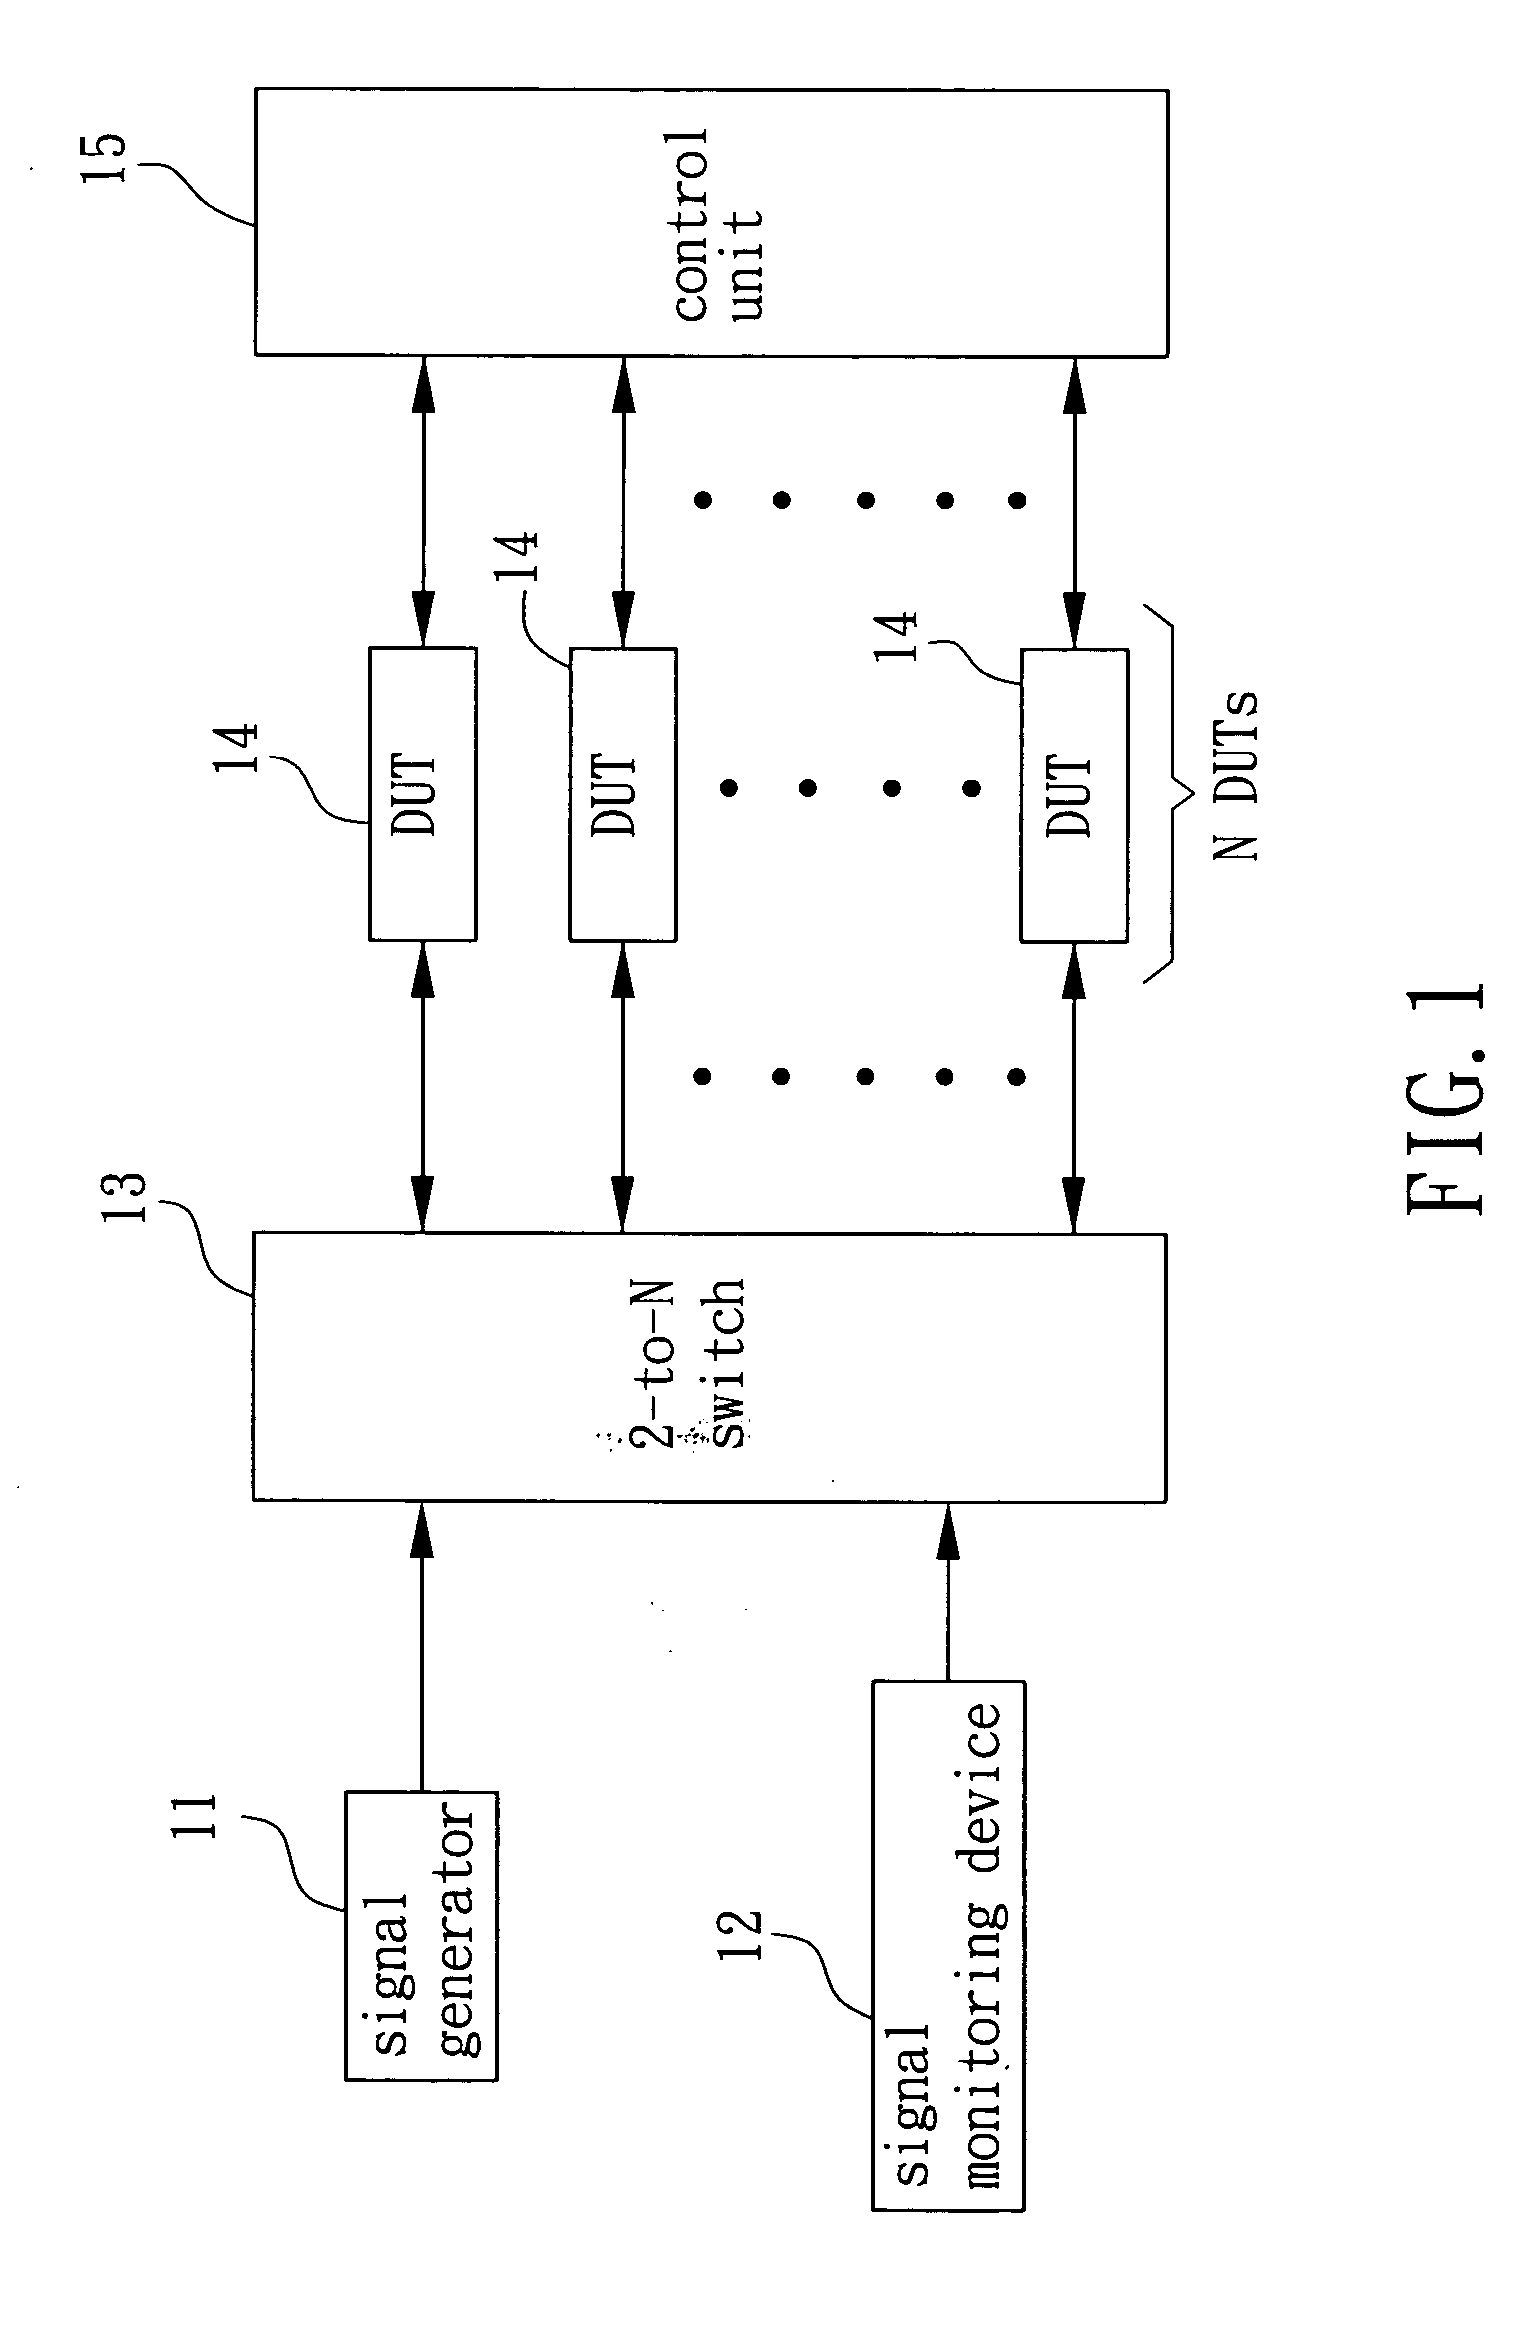 Batch testing system and method for wireless communication devices